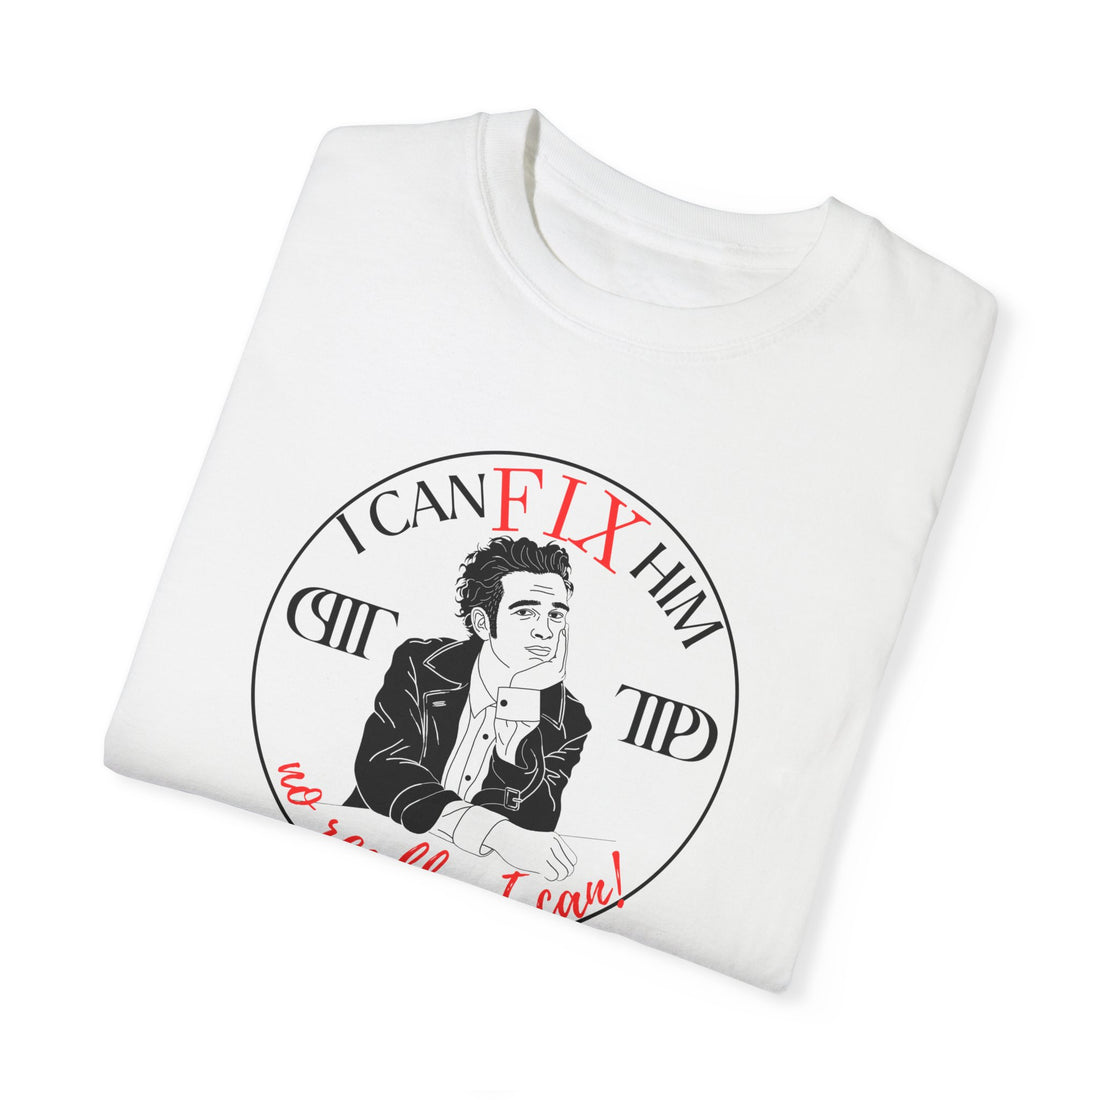 I Can Fix Him Taylor Swift Matty Healy TTPD  Graphic Tee